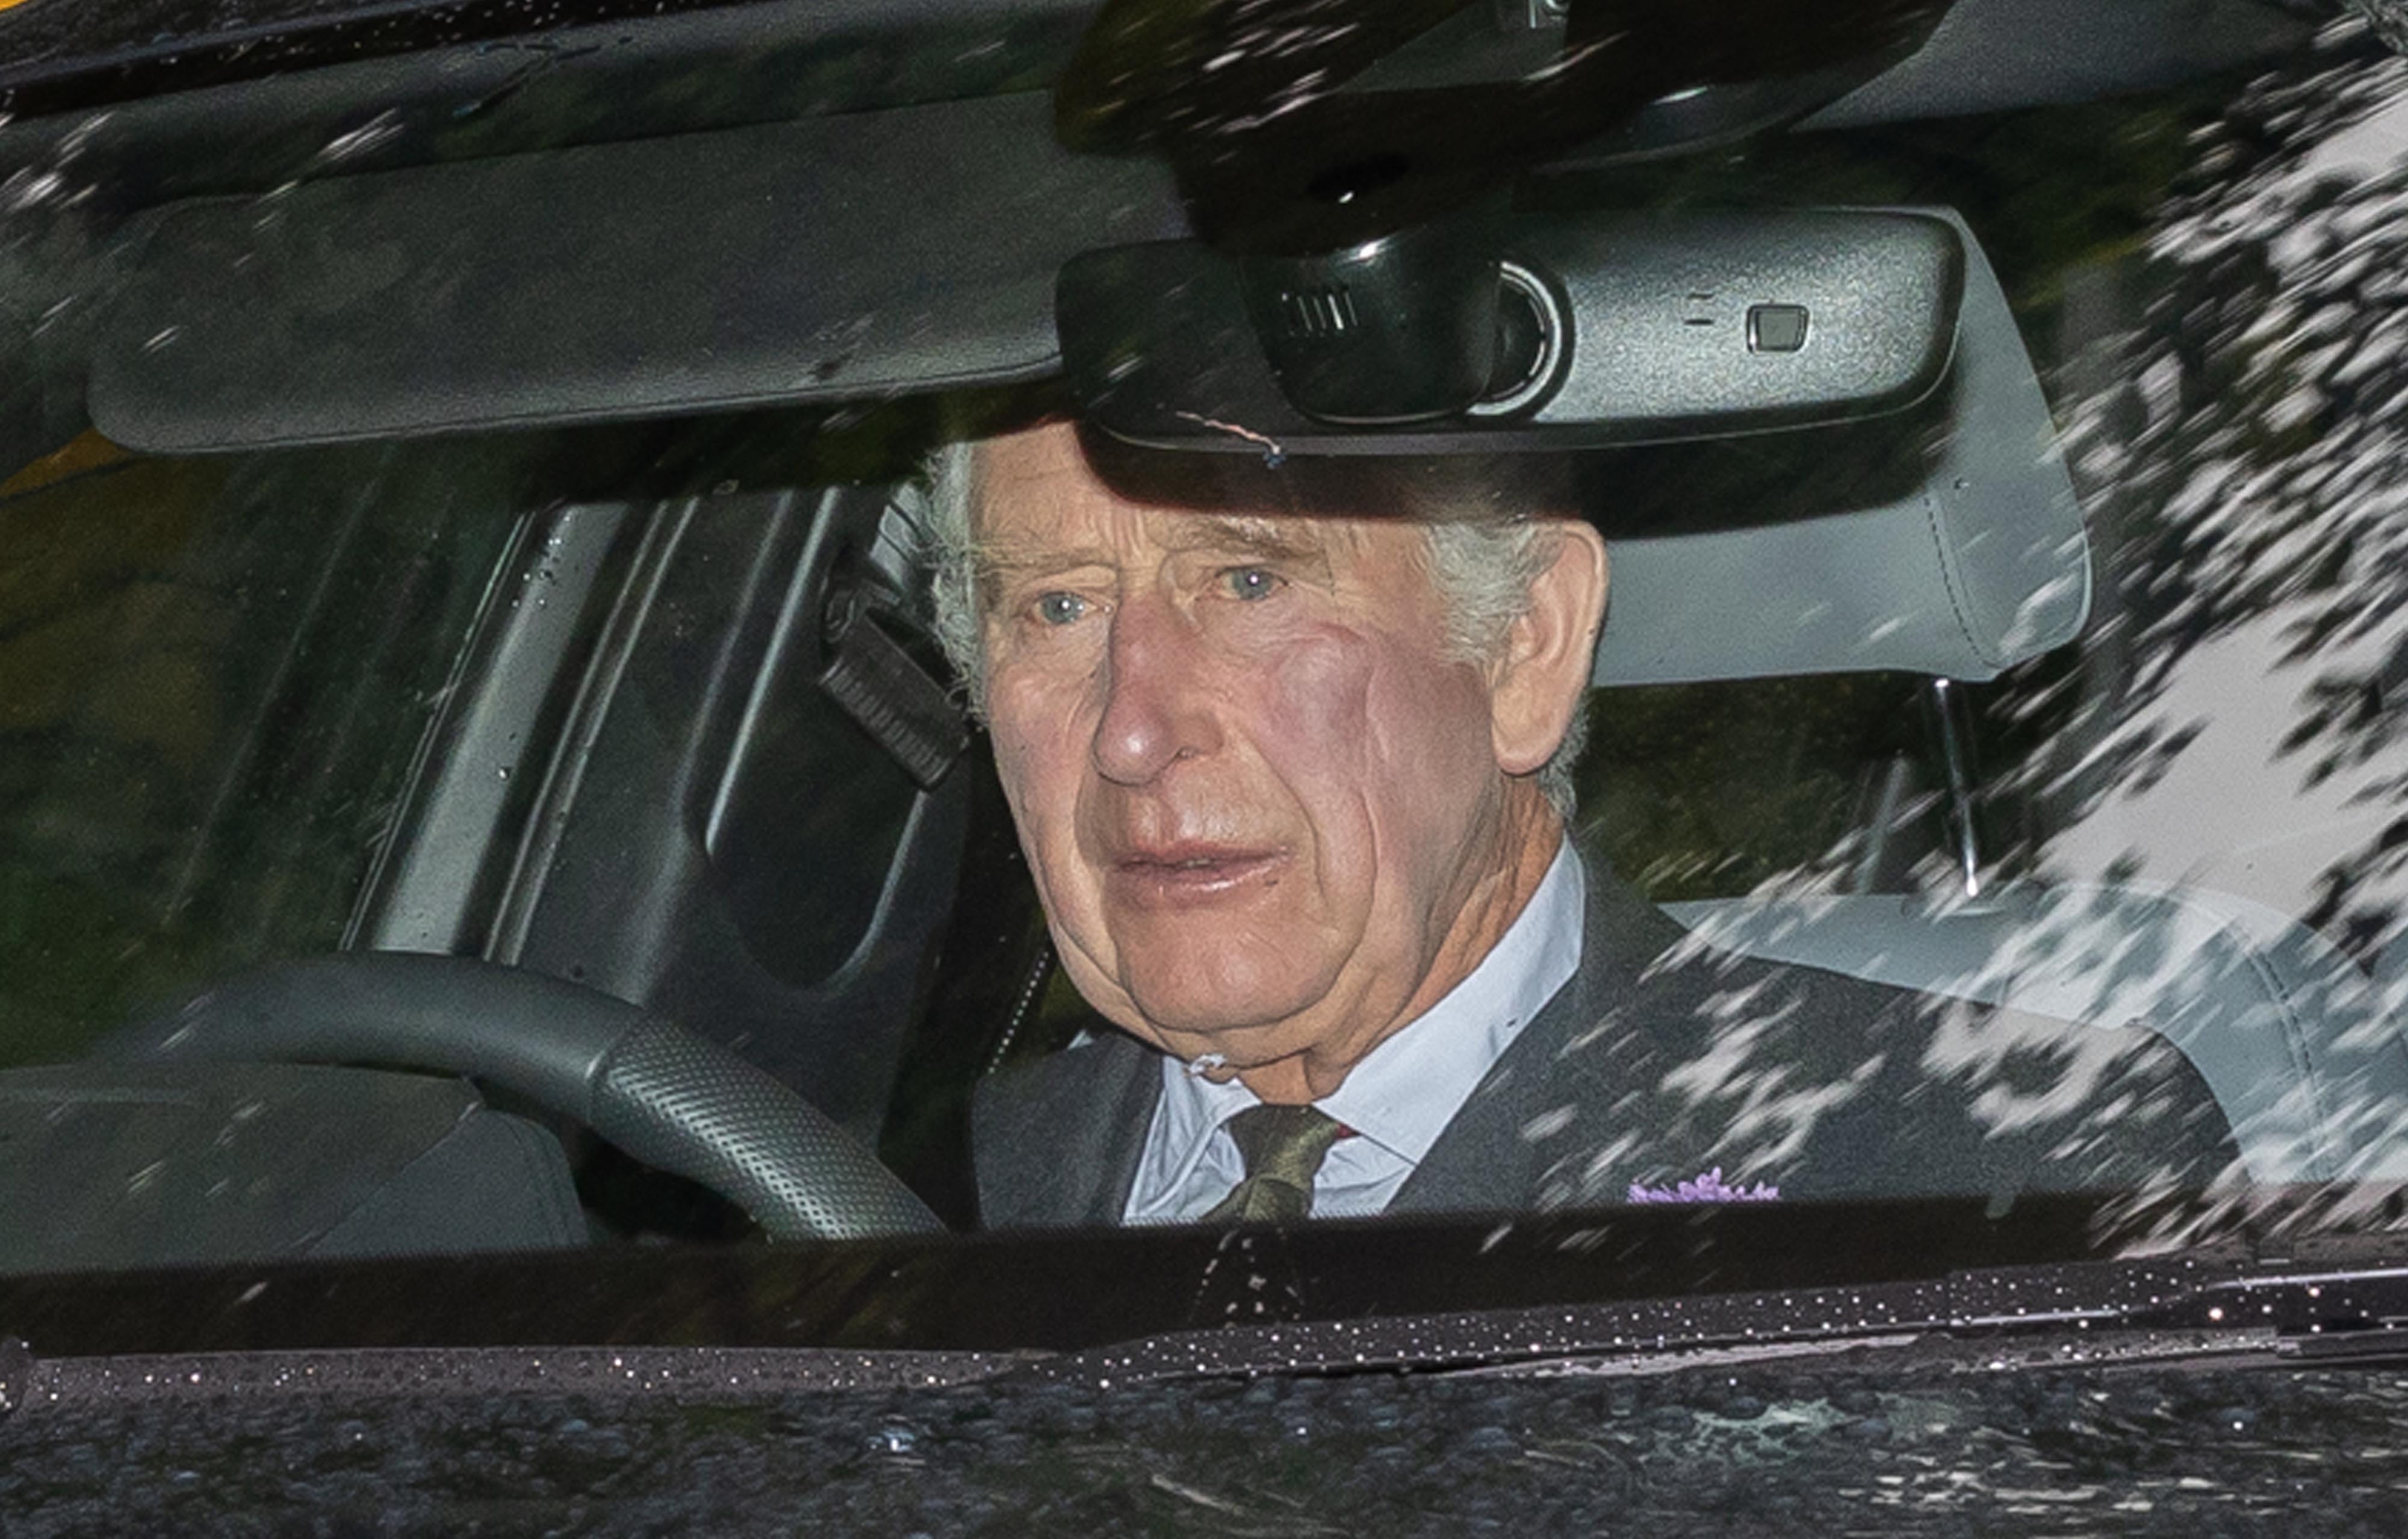 The then-Prince of Wales at Balmoral on September 4, 2022 | Source: Getty Images